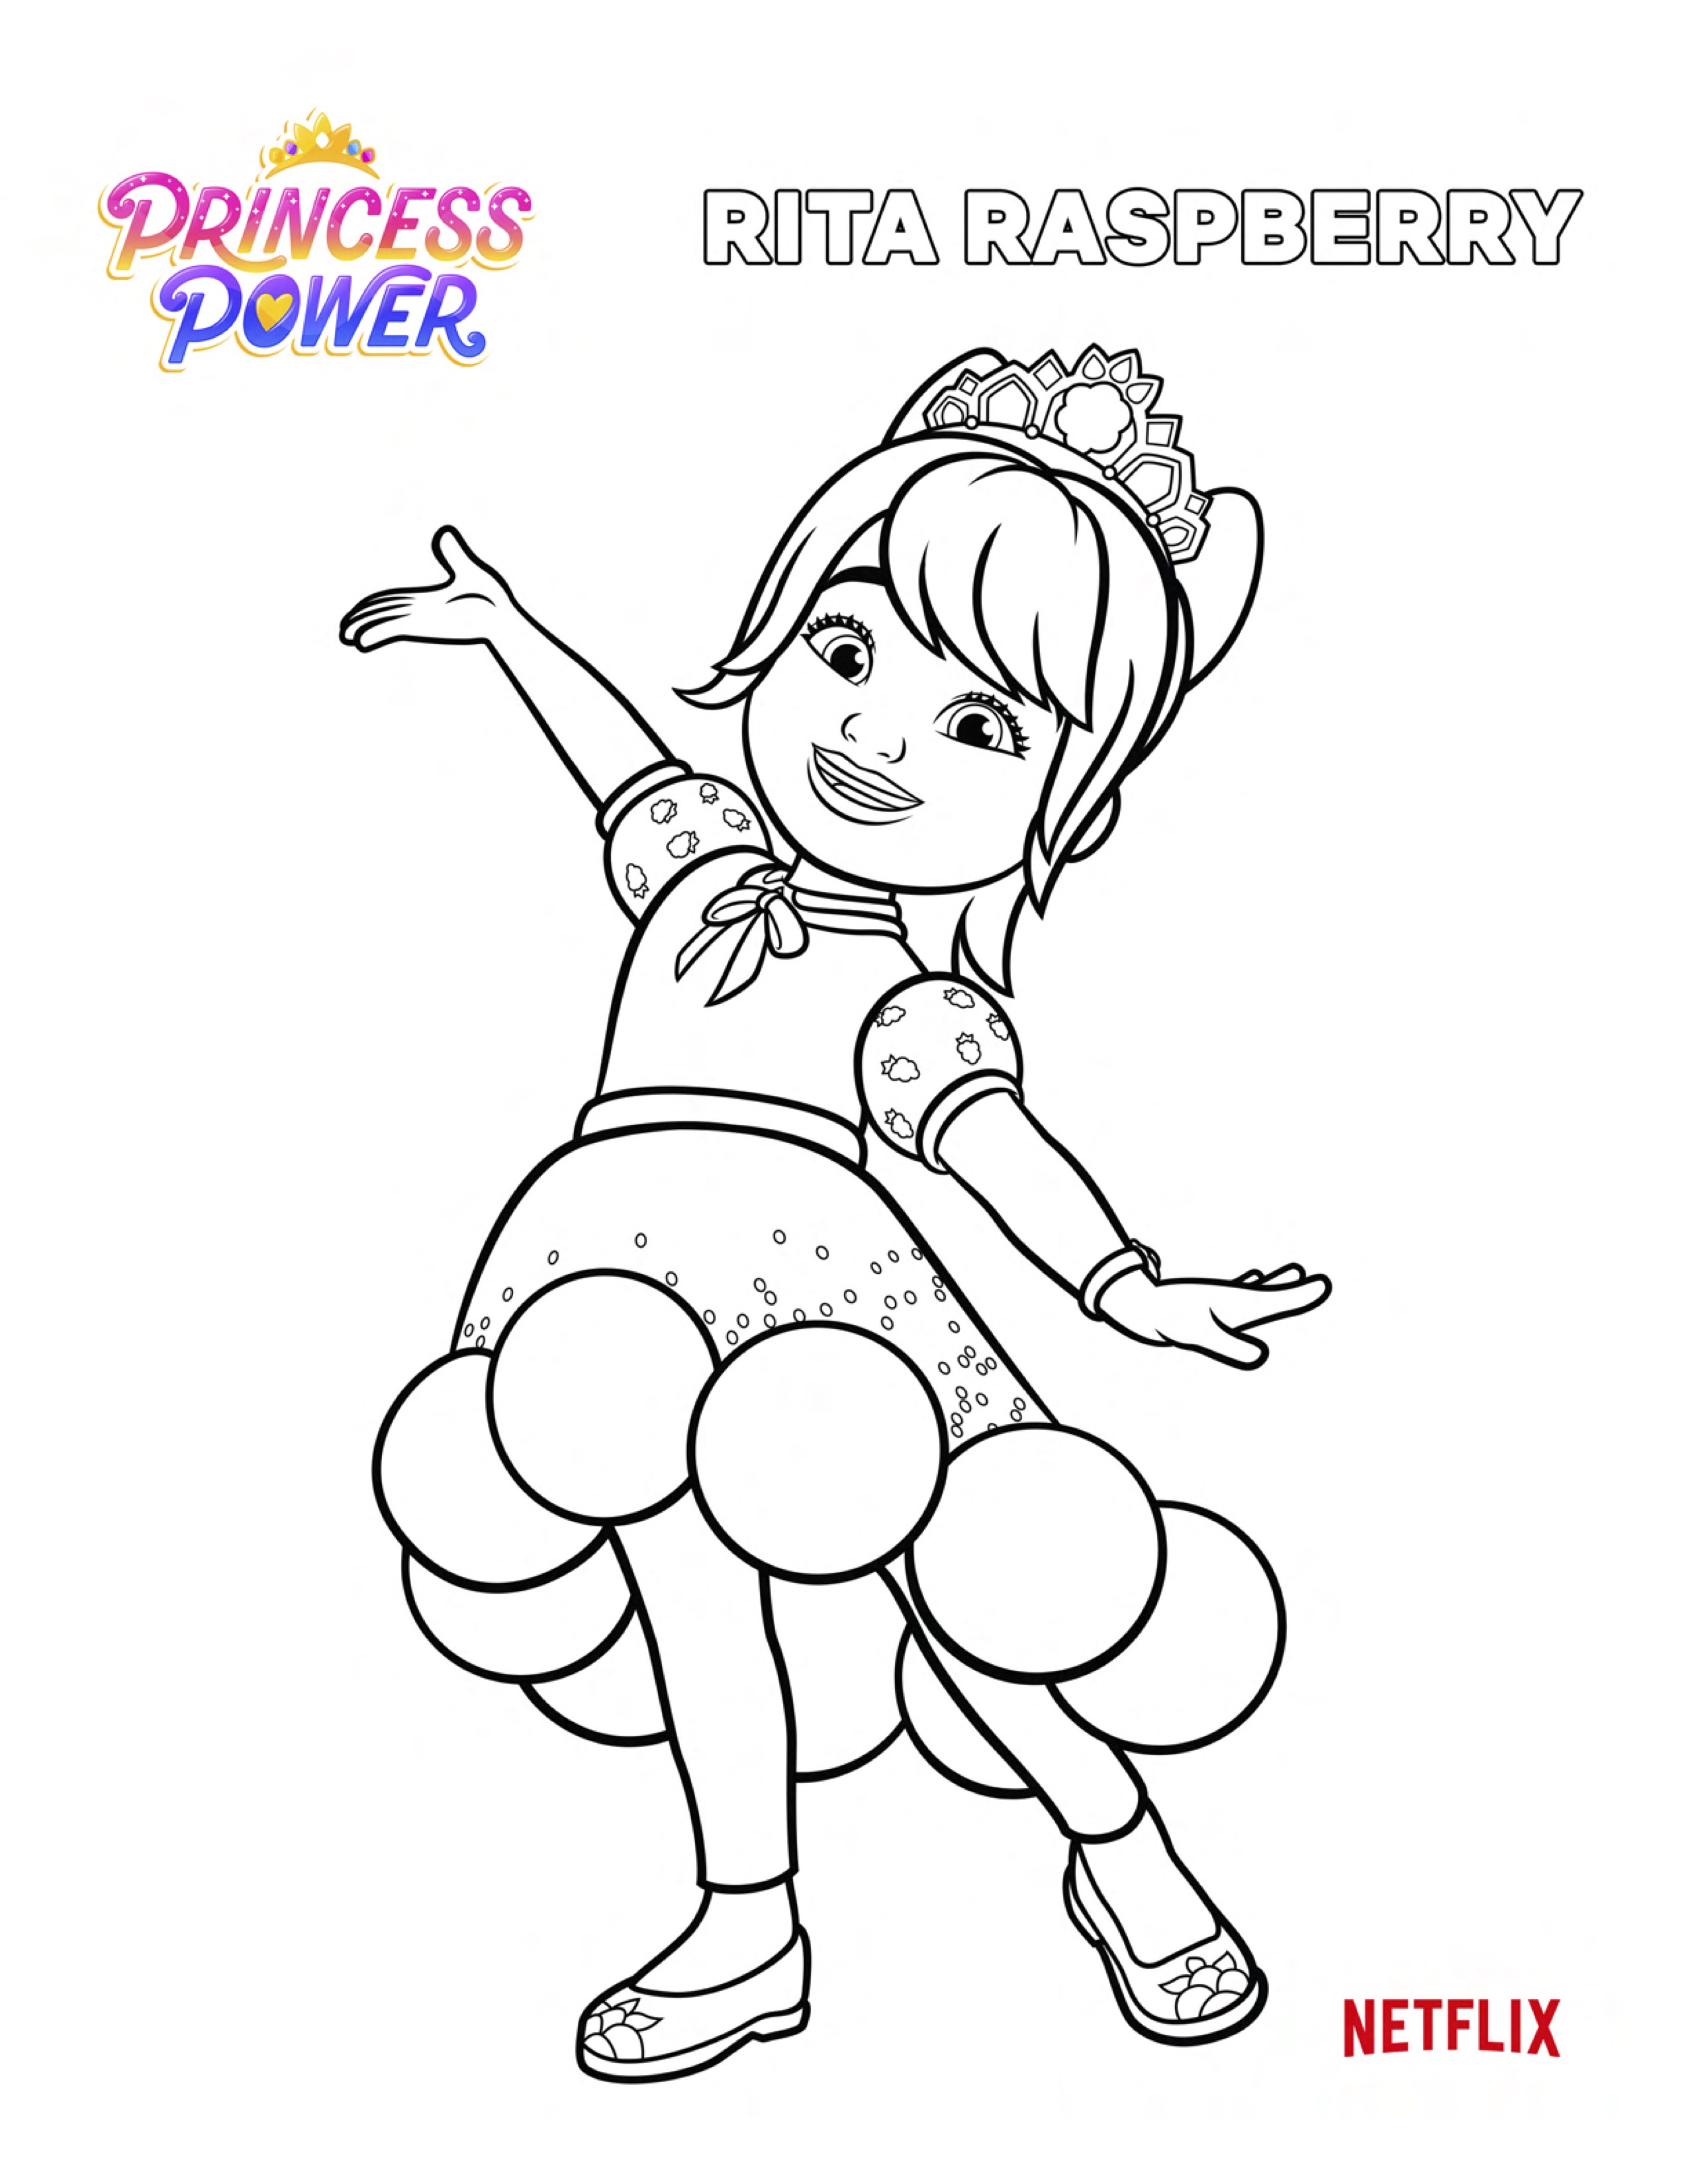 Gabby Playing Guitar Coloring Page - Free Printable Coloring Pages for Kids